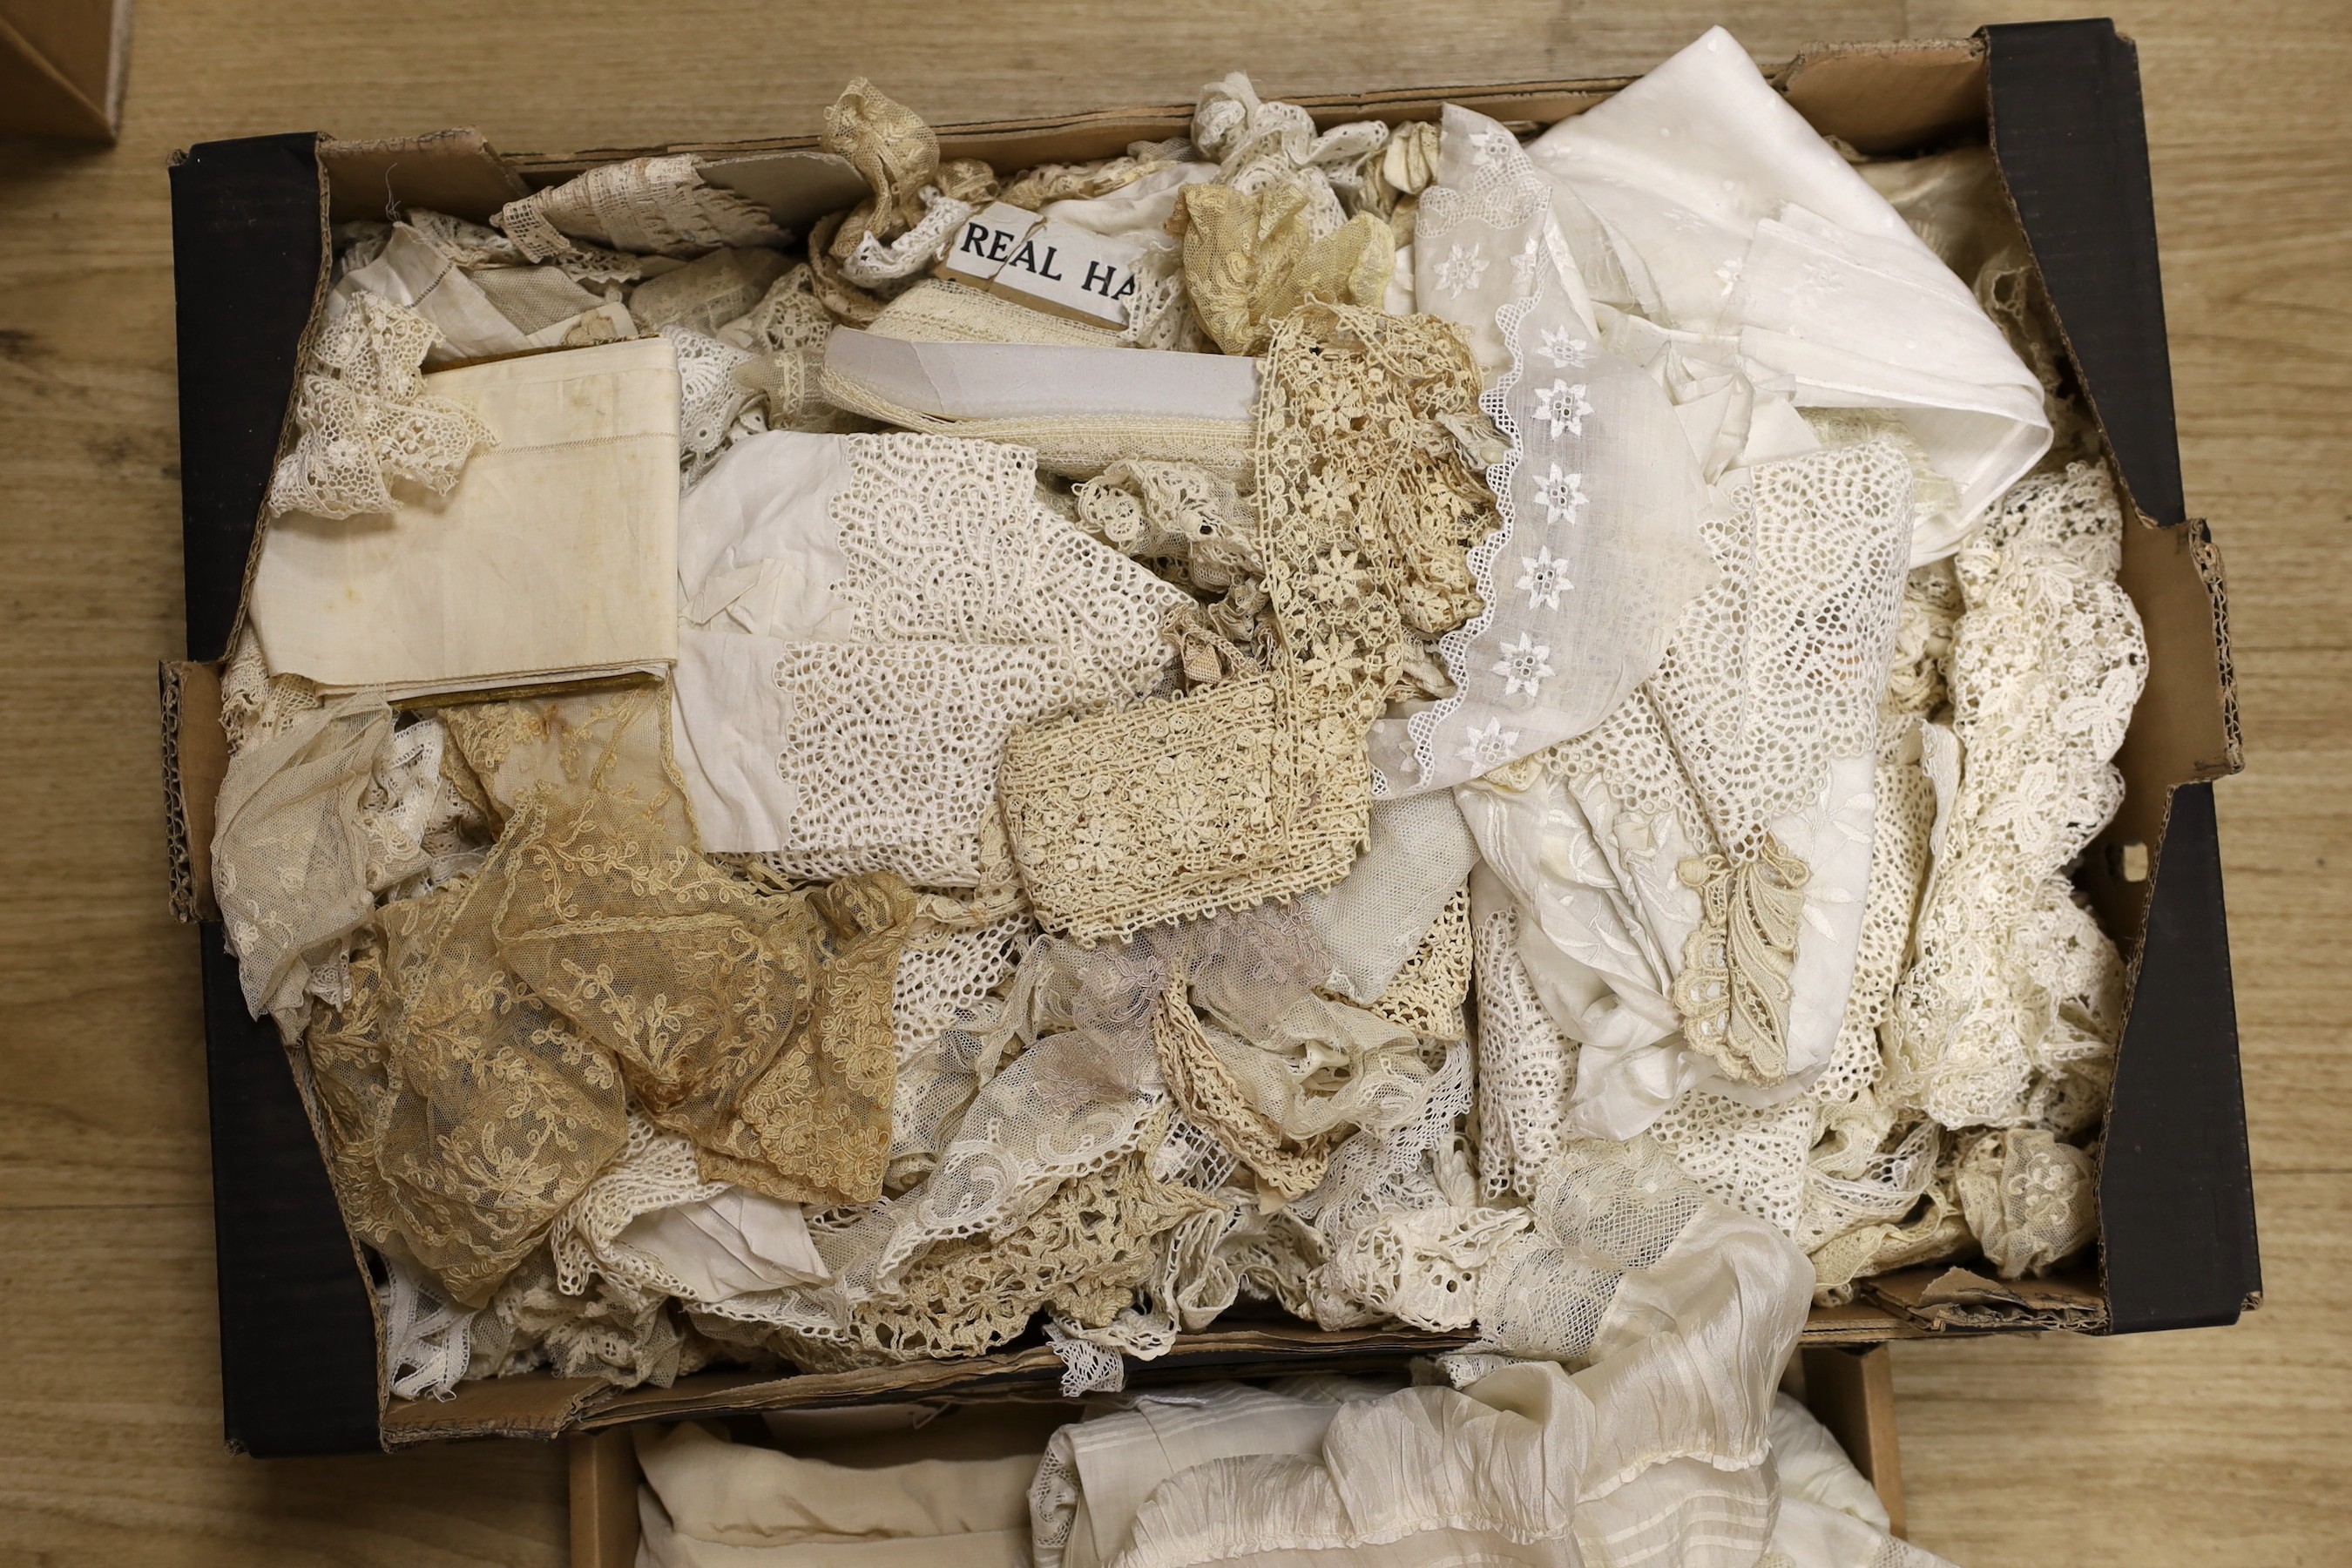 A quantity of mixed machine and some handmade lace including Irish crochet, together with a white work petticoat, silk christening gown and a silk shawl